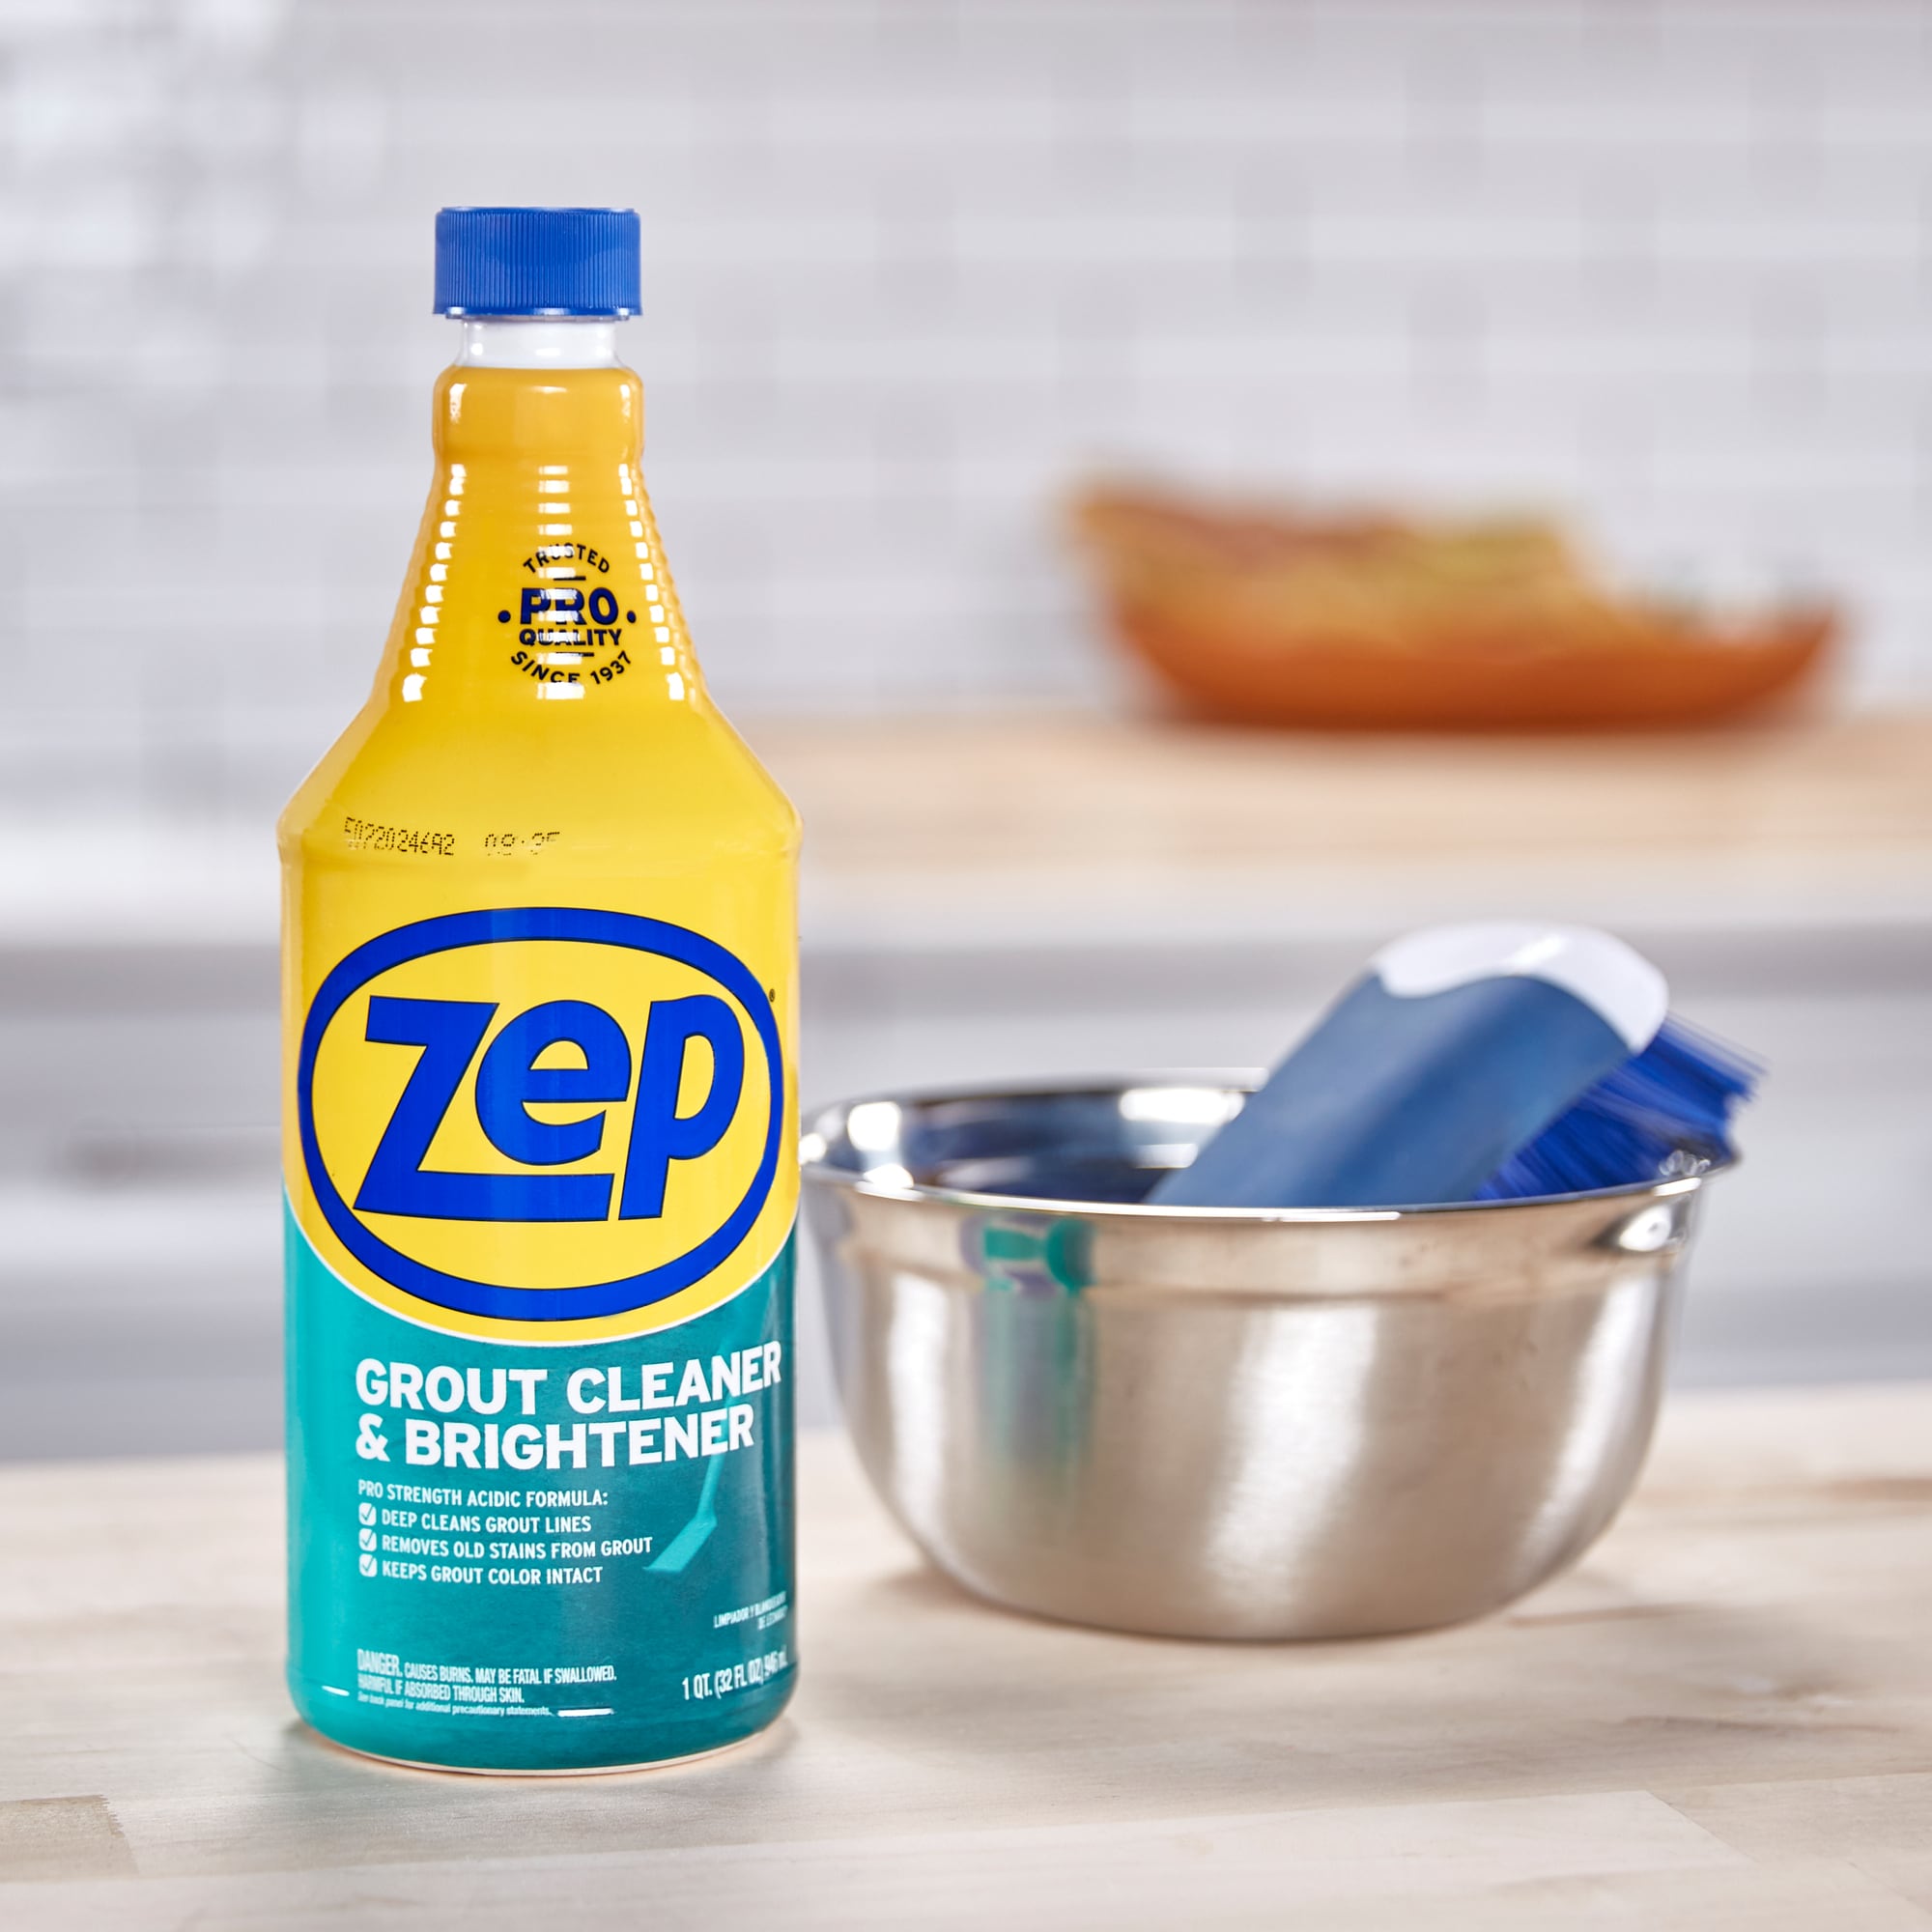  Zep Grout Cleaner and Brightener - 32 oz (Case of 2